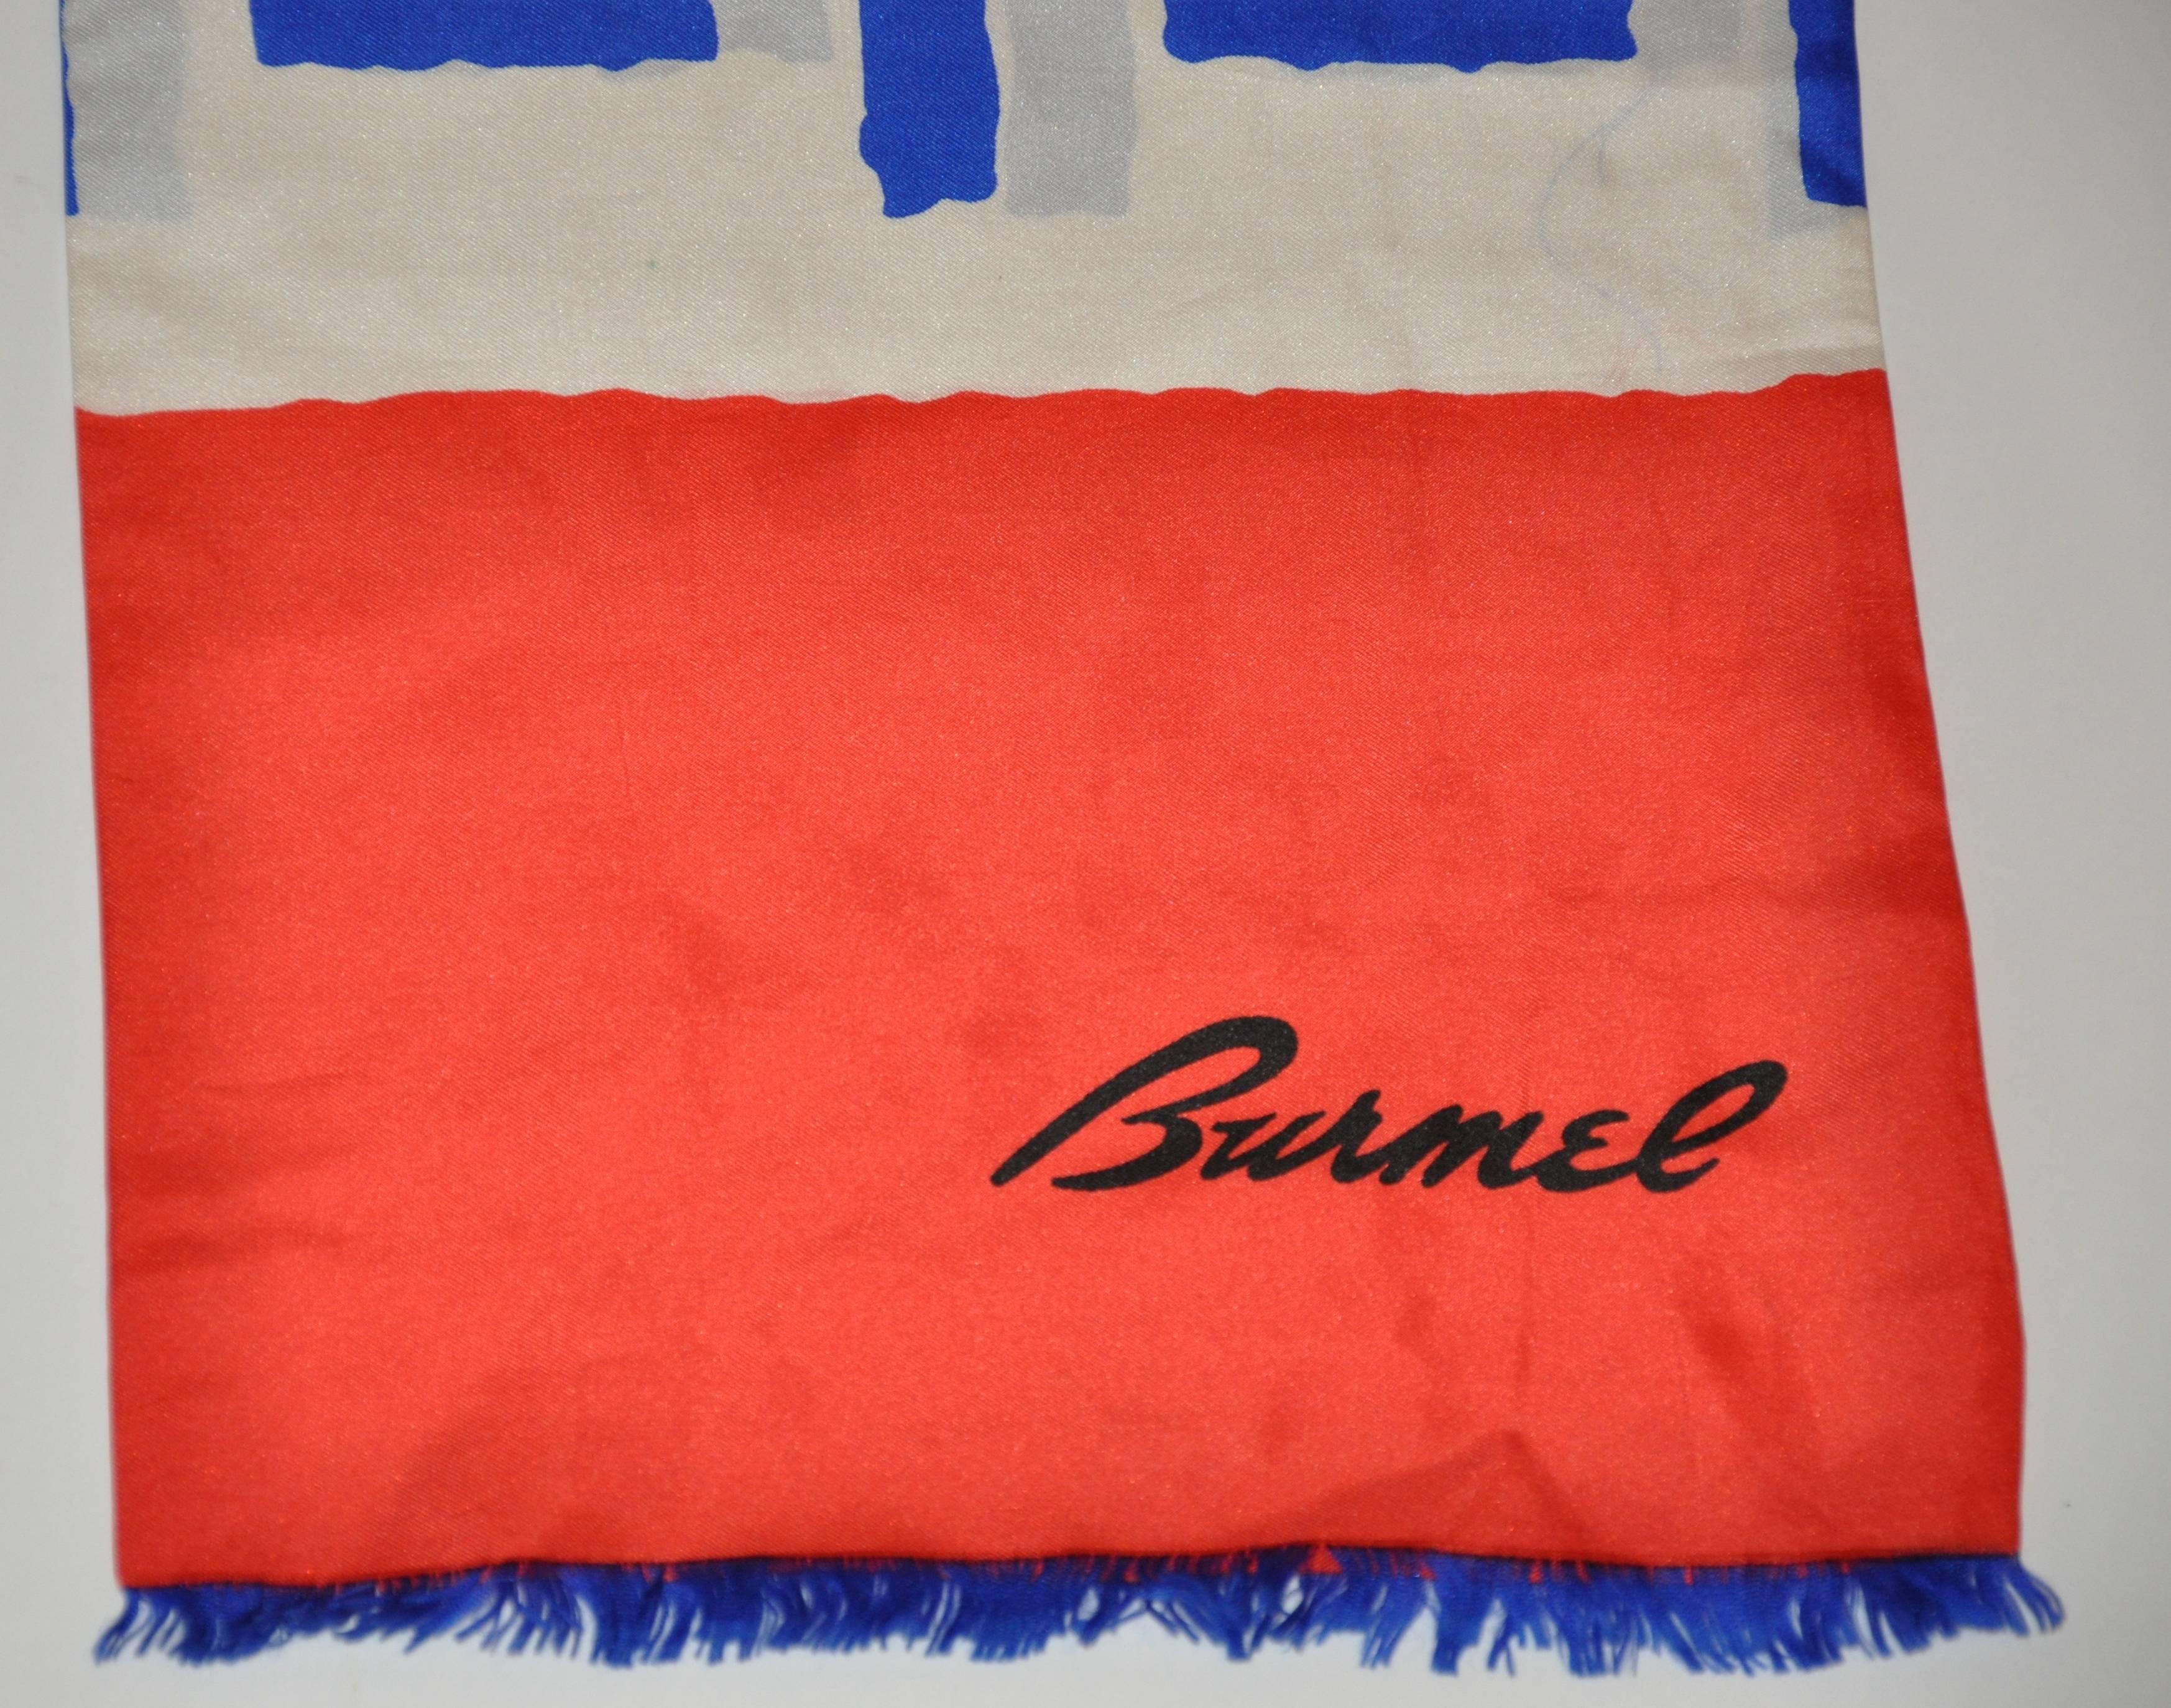 Burmel wonderfully bold red, white and blue double-layered rectangle silk scarf finished with fringed edges measures 8 1/2